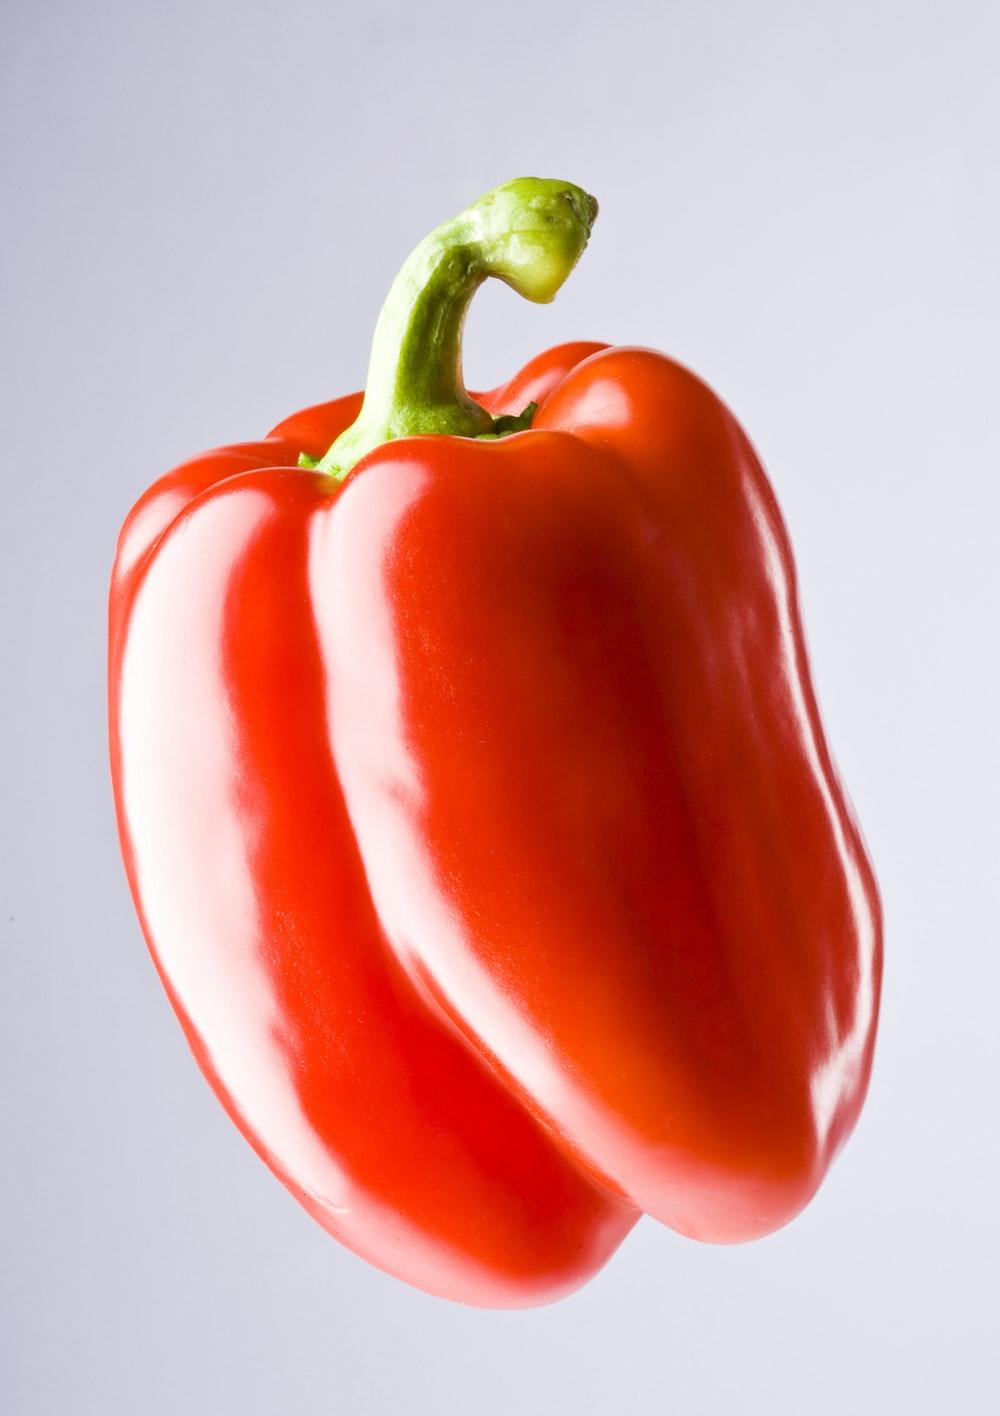 Bell Pepper Picture. Download Free Image